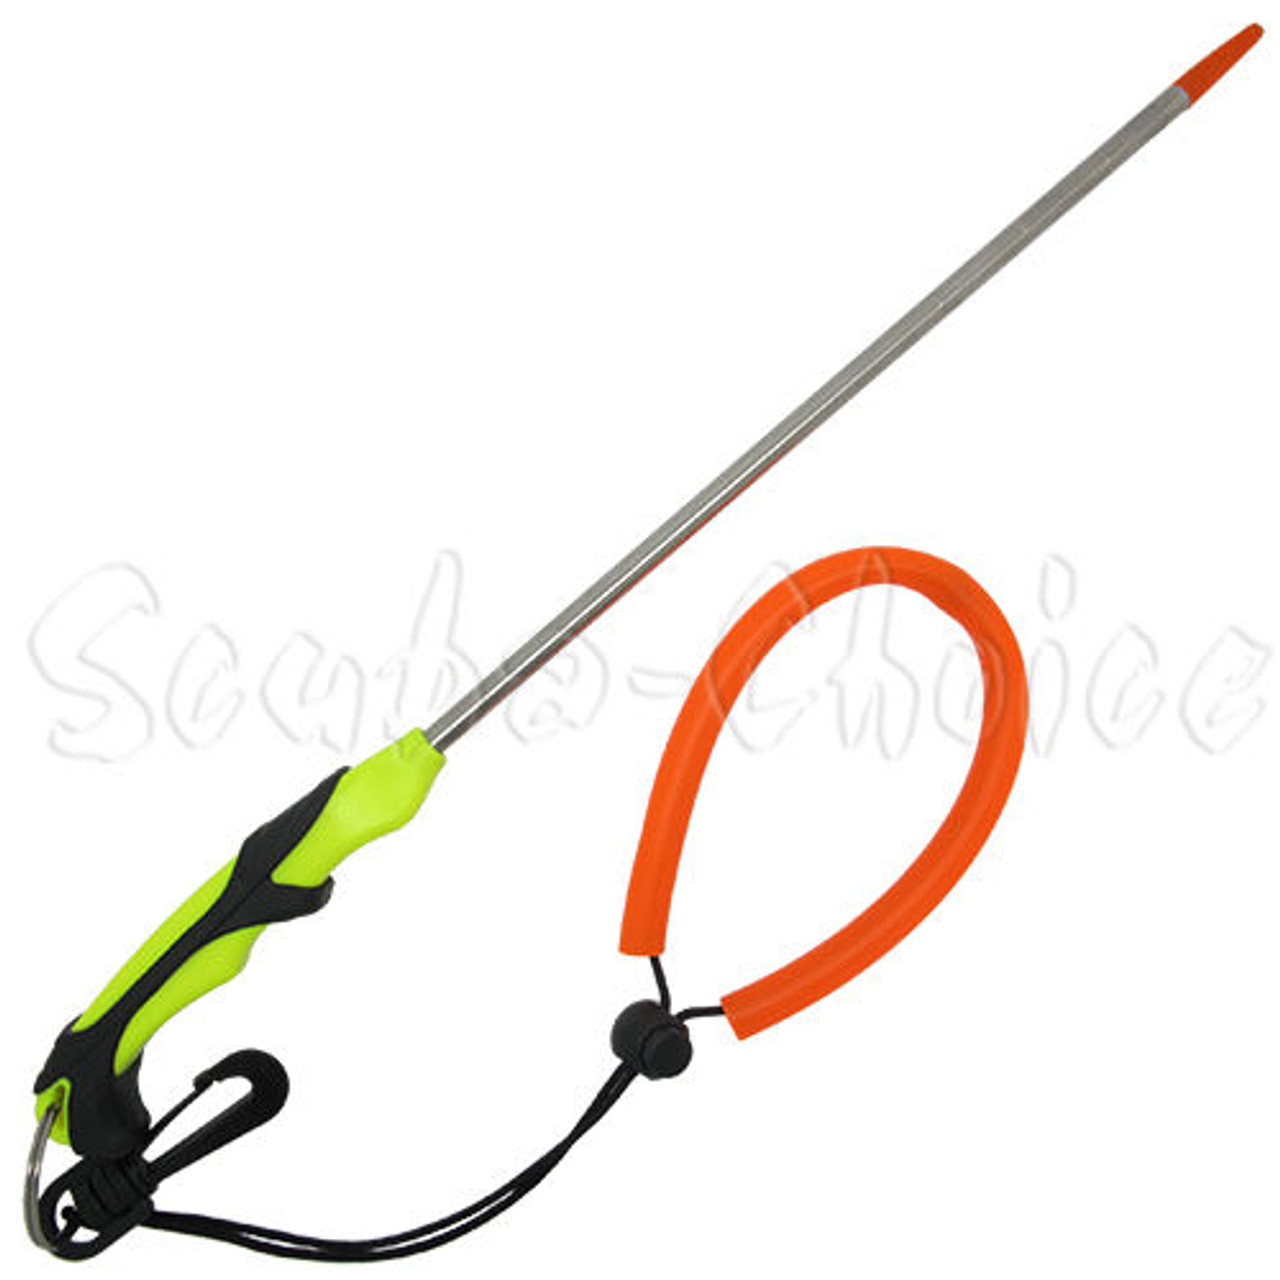 Scuba Choice 13-3/4 Stainless Steel Lobster Tickle Stick with Clip and Lanyard (Yellow)